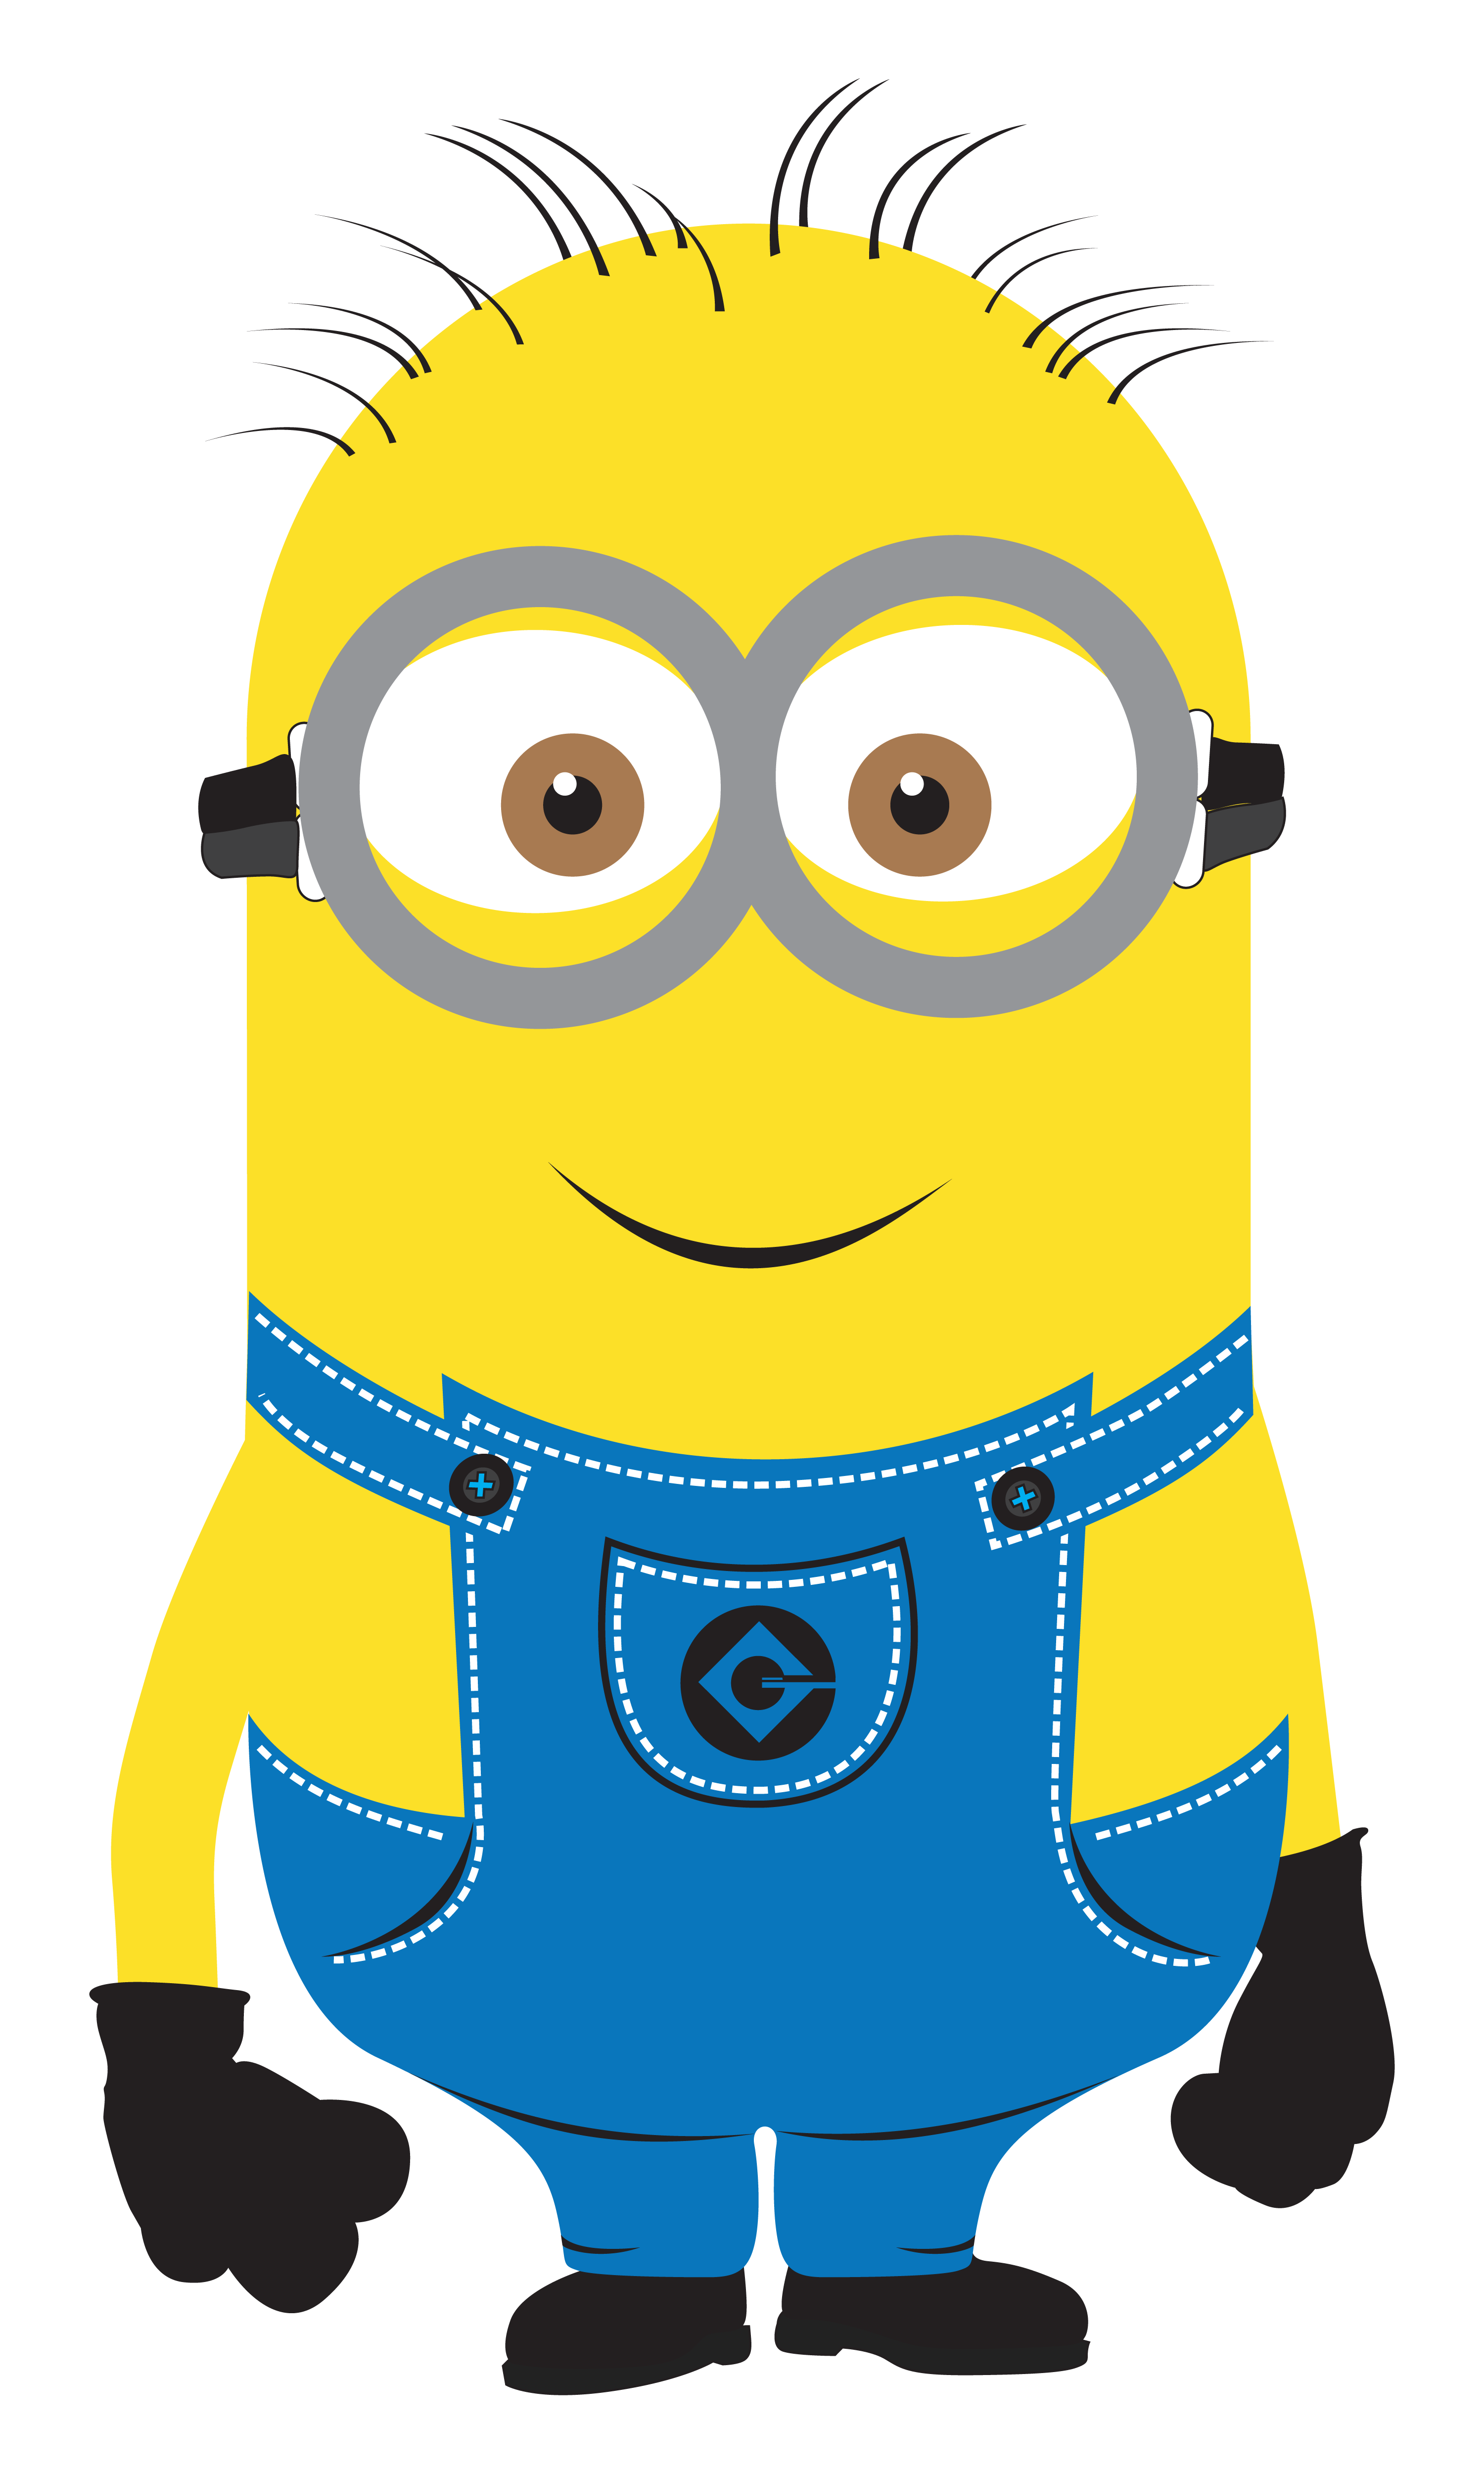 Despicable Me 2 Minions Vector Ai, Eps, Cdr amp; High Res PNGs